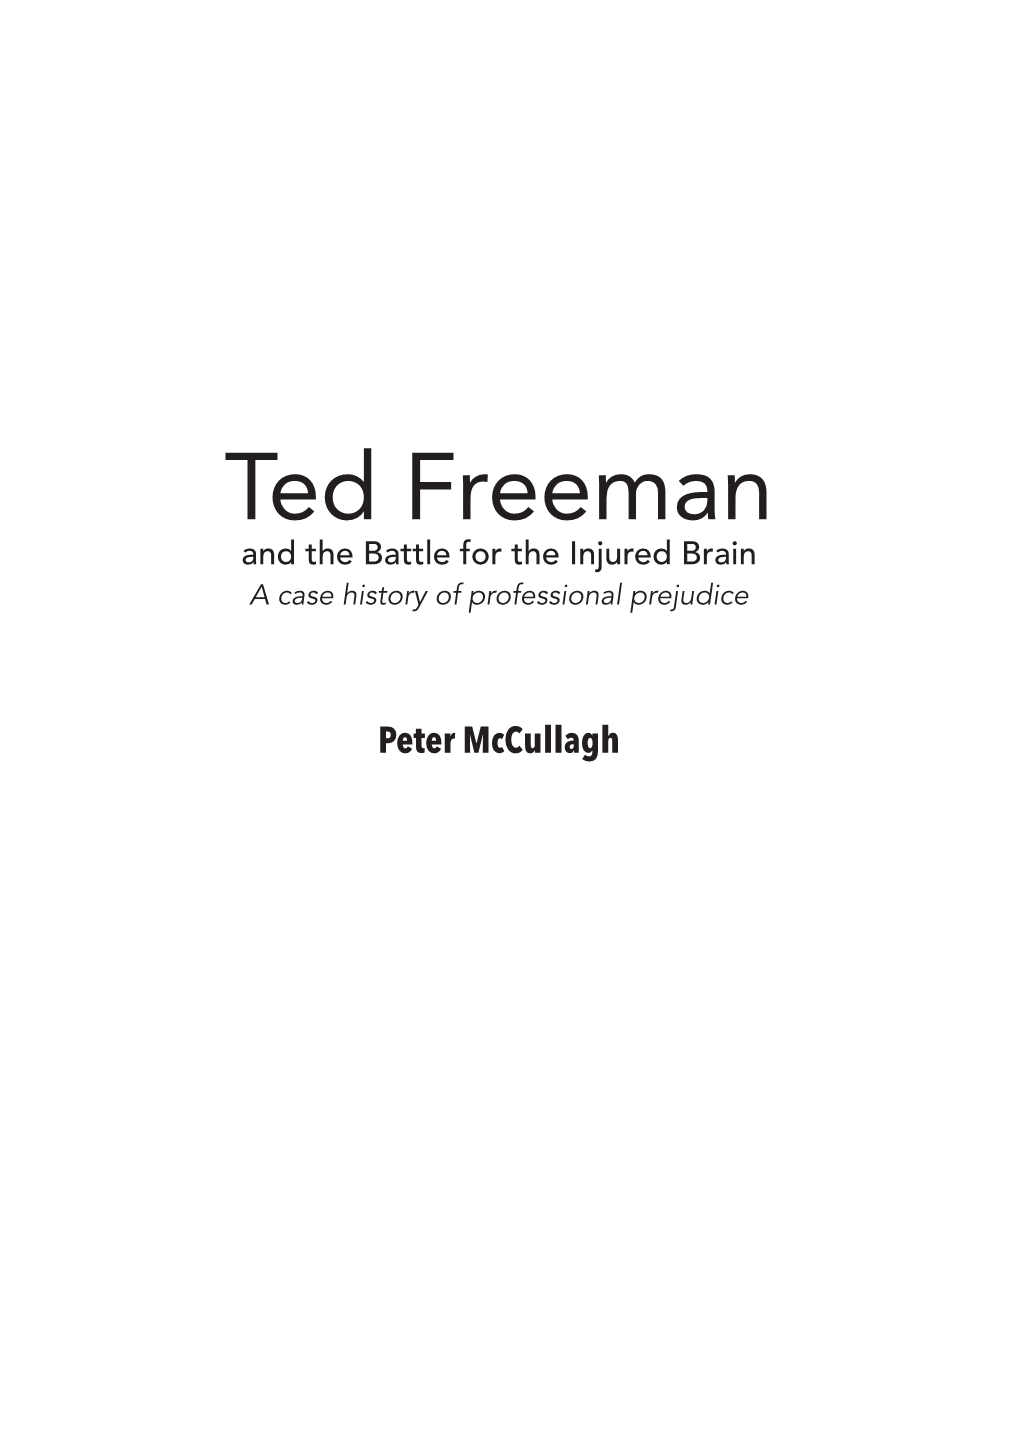 Ted Freeman and the Battle for the Injured Brain: A